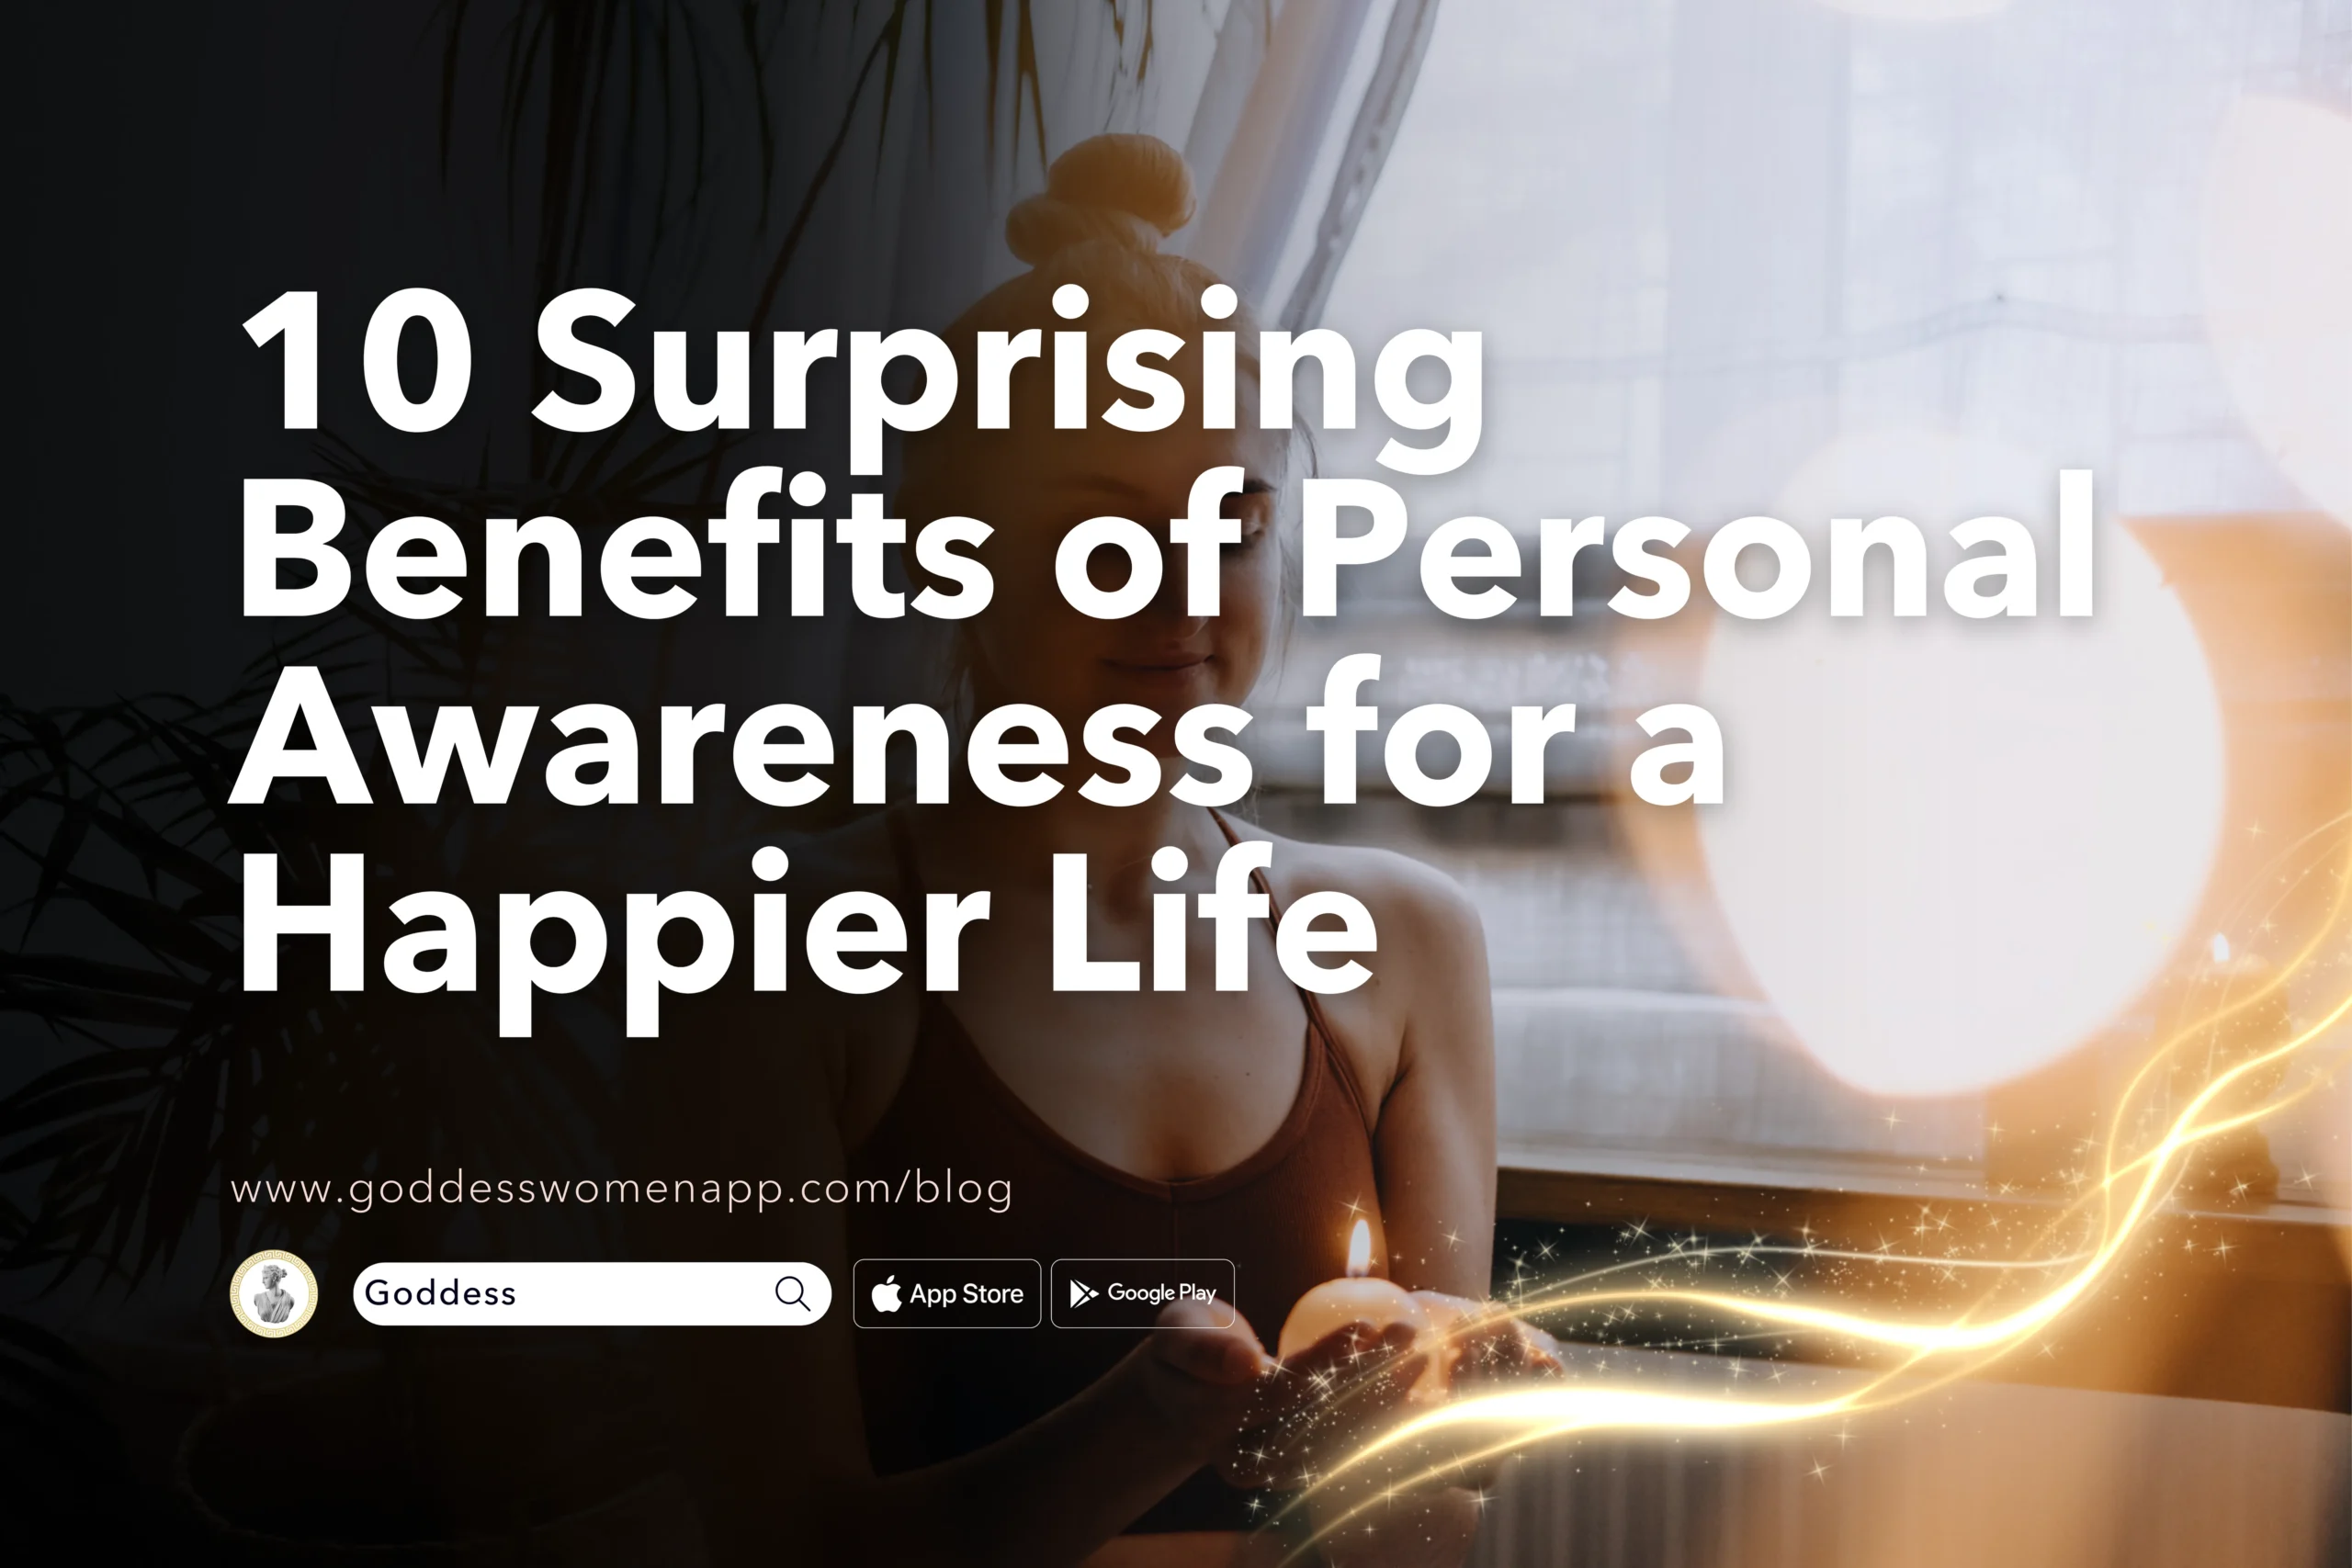 10 Surprising Benefits of Personal Awareness for a Happier Life